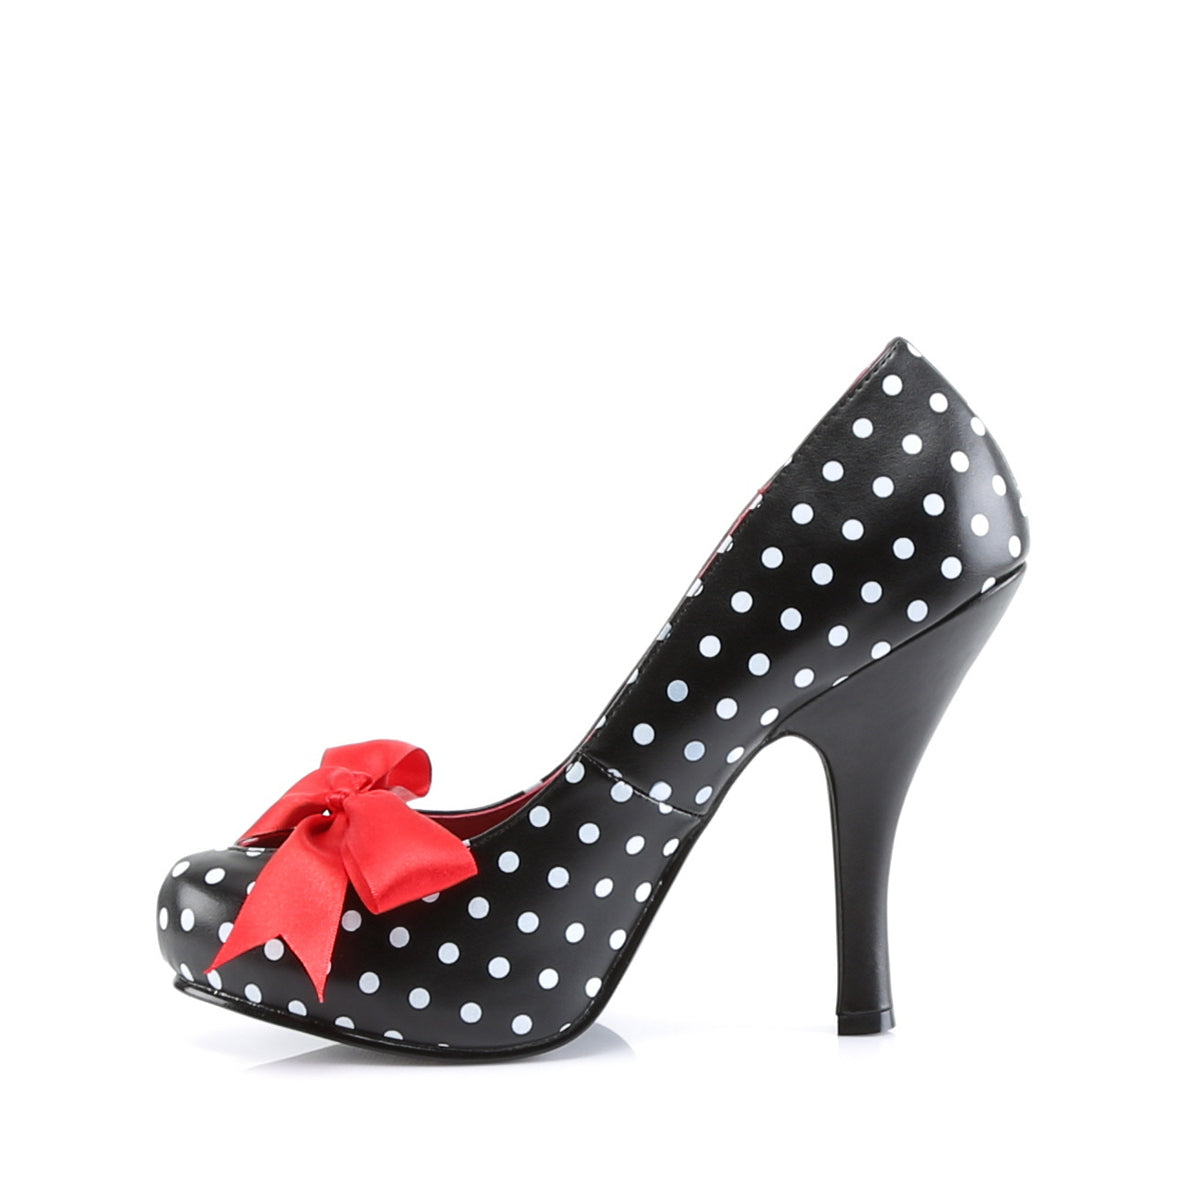 CUTIEPIE-06 Pin Up 4.5 Inch Heel (Polka Dots Print) Shoes-Pin Up Couture- Sexy Shoes Pole Dance Heels